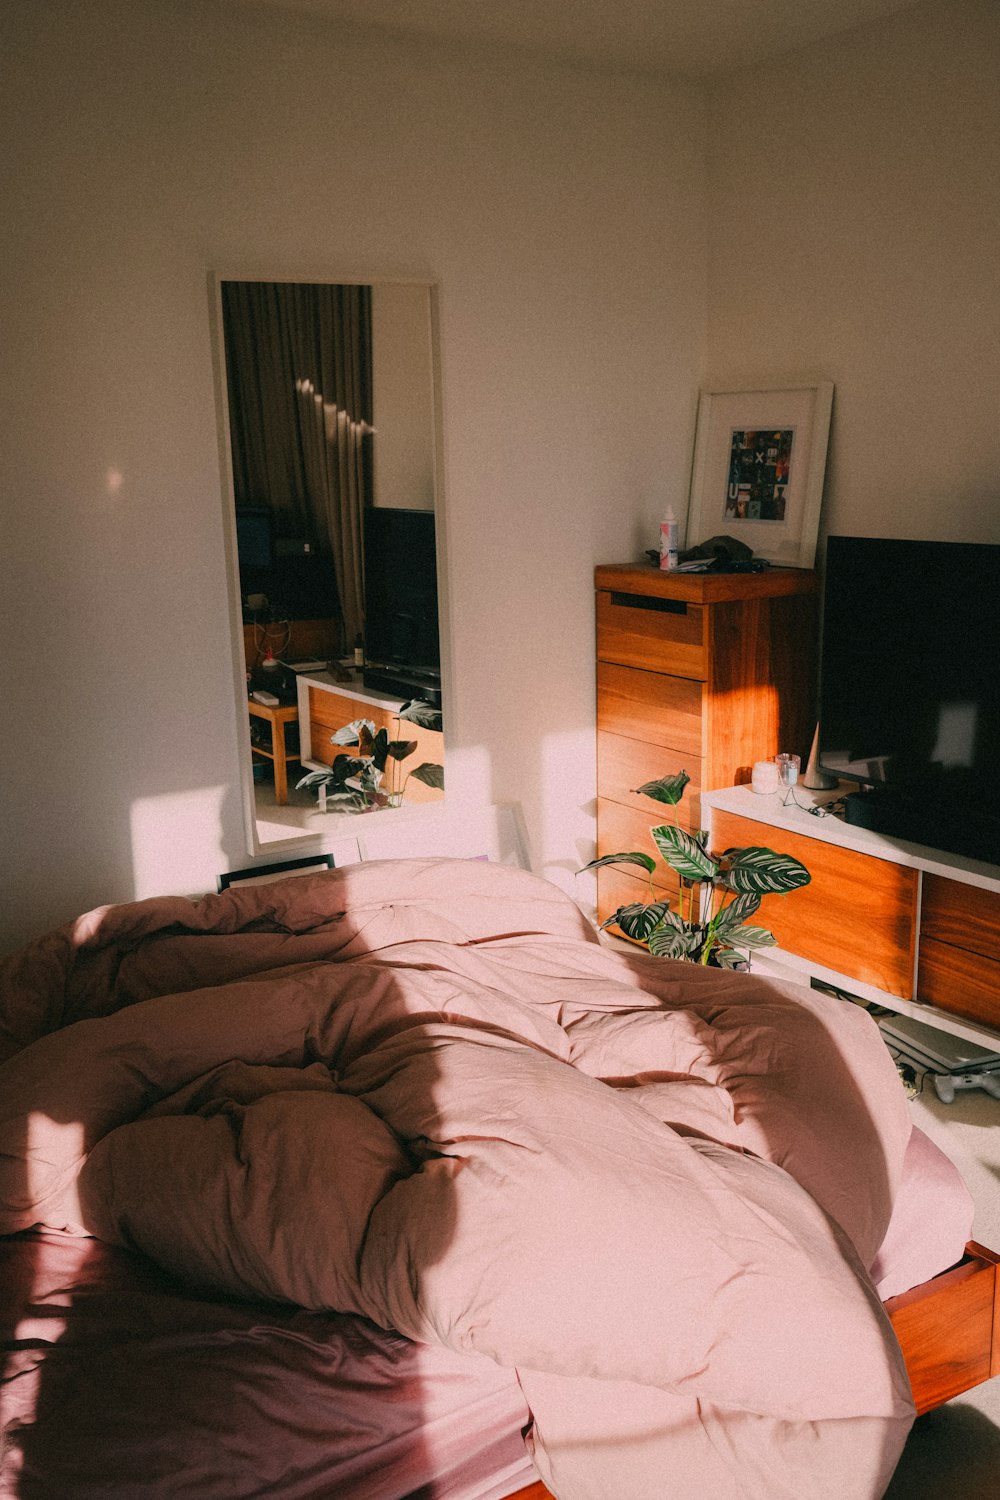 Room Aesthetic Pictures | Download Free Images on Unsplash